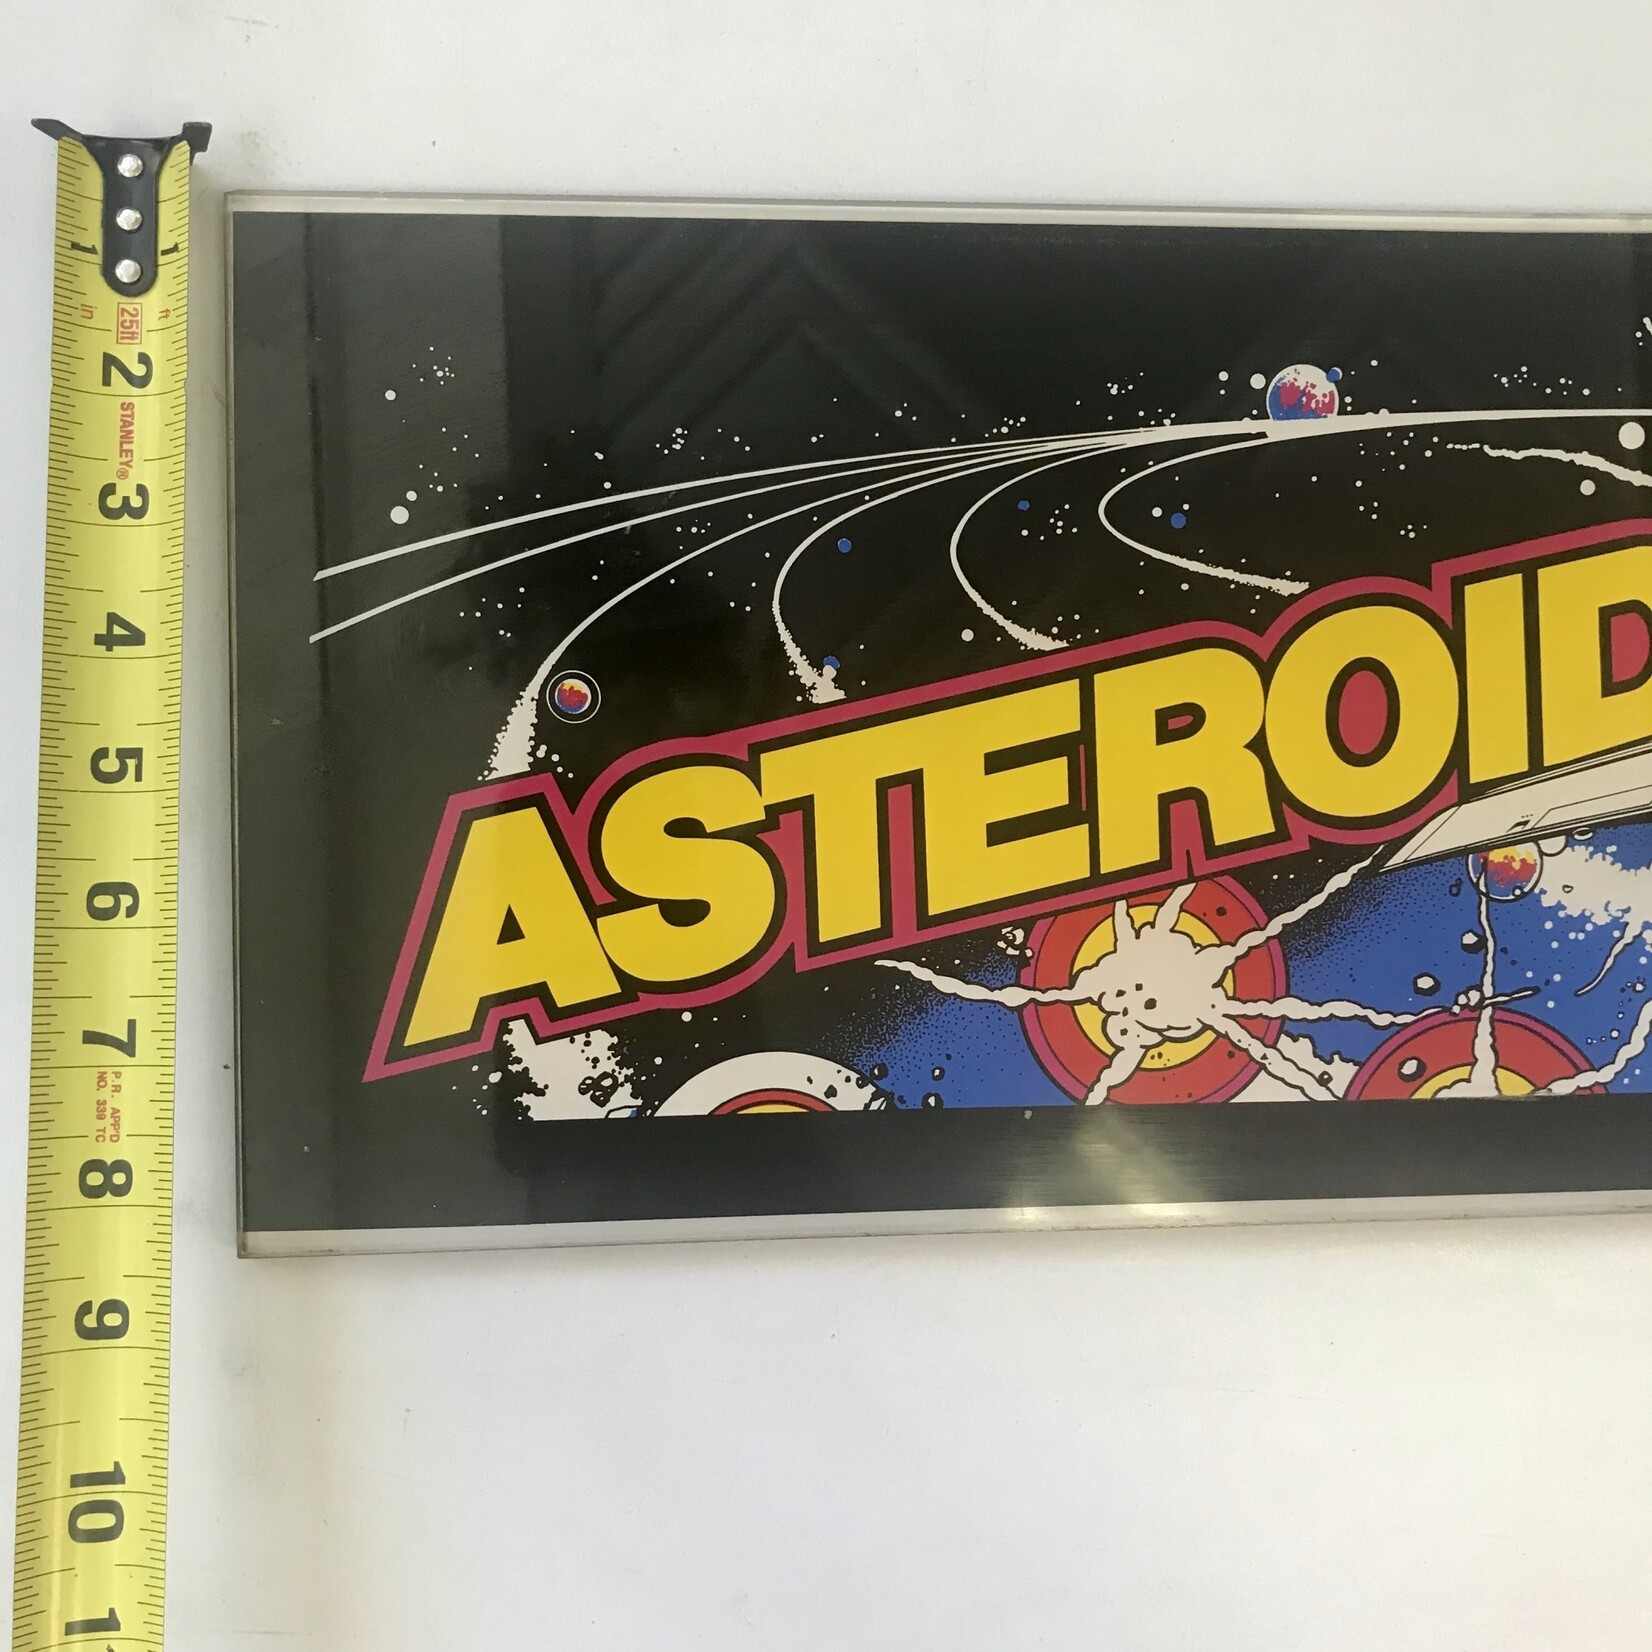 Asteroids - Arcade Game Marquee (USED)